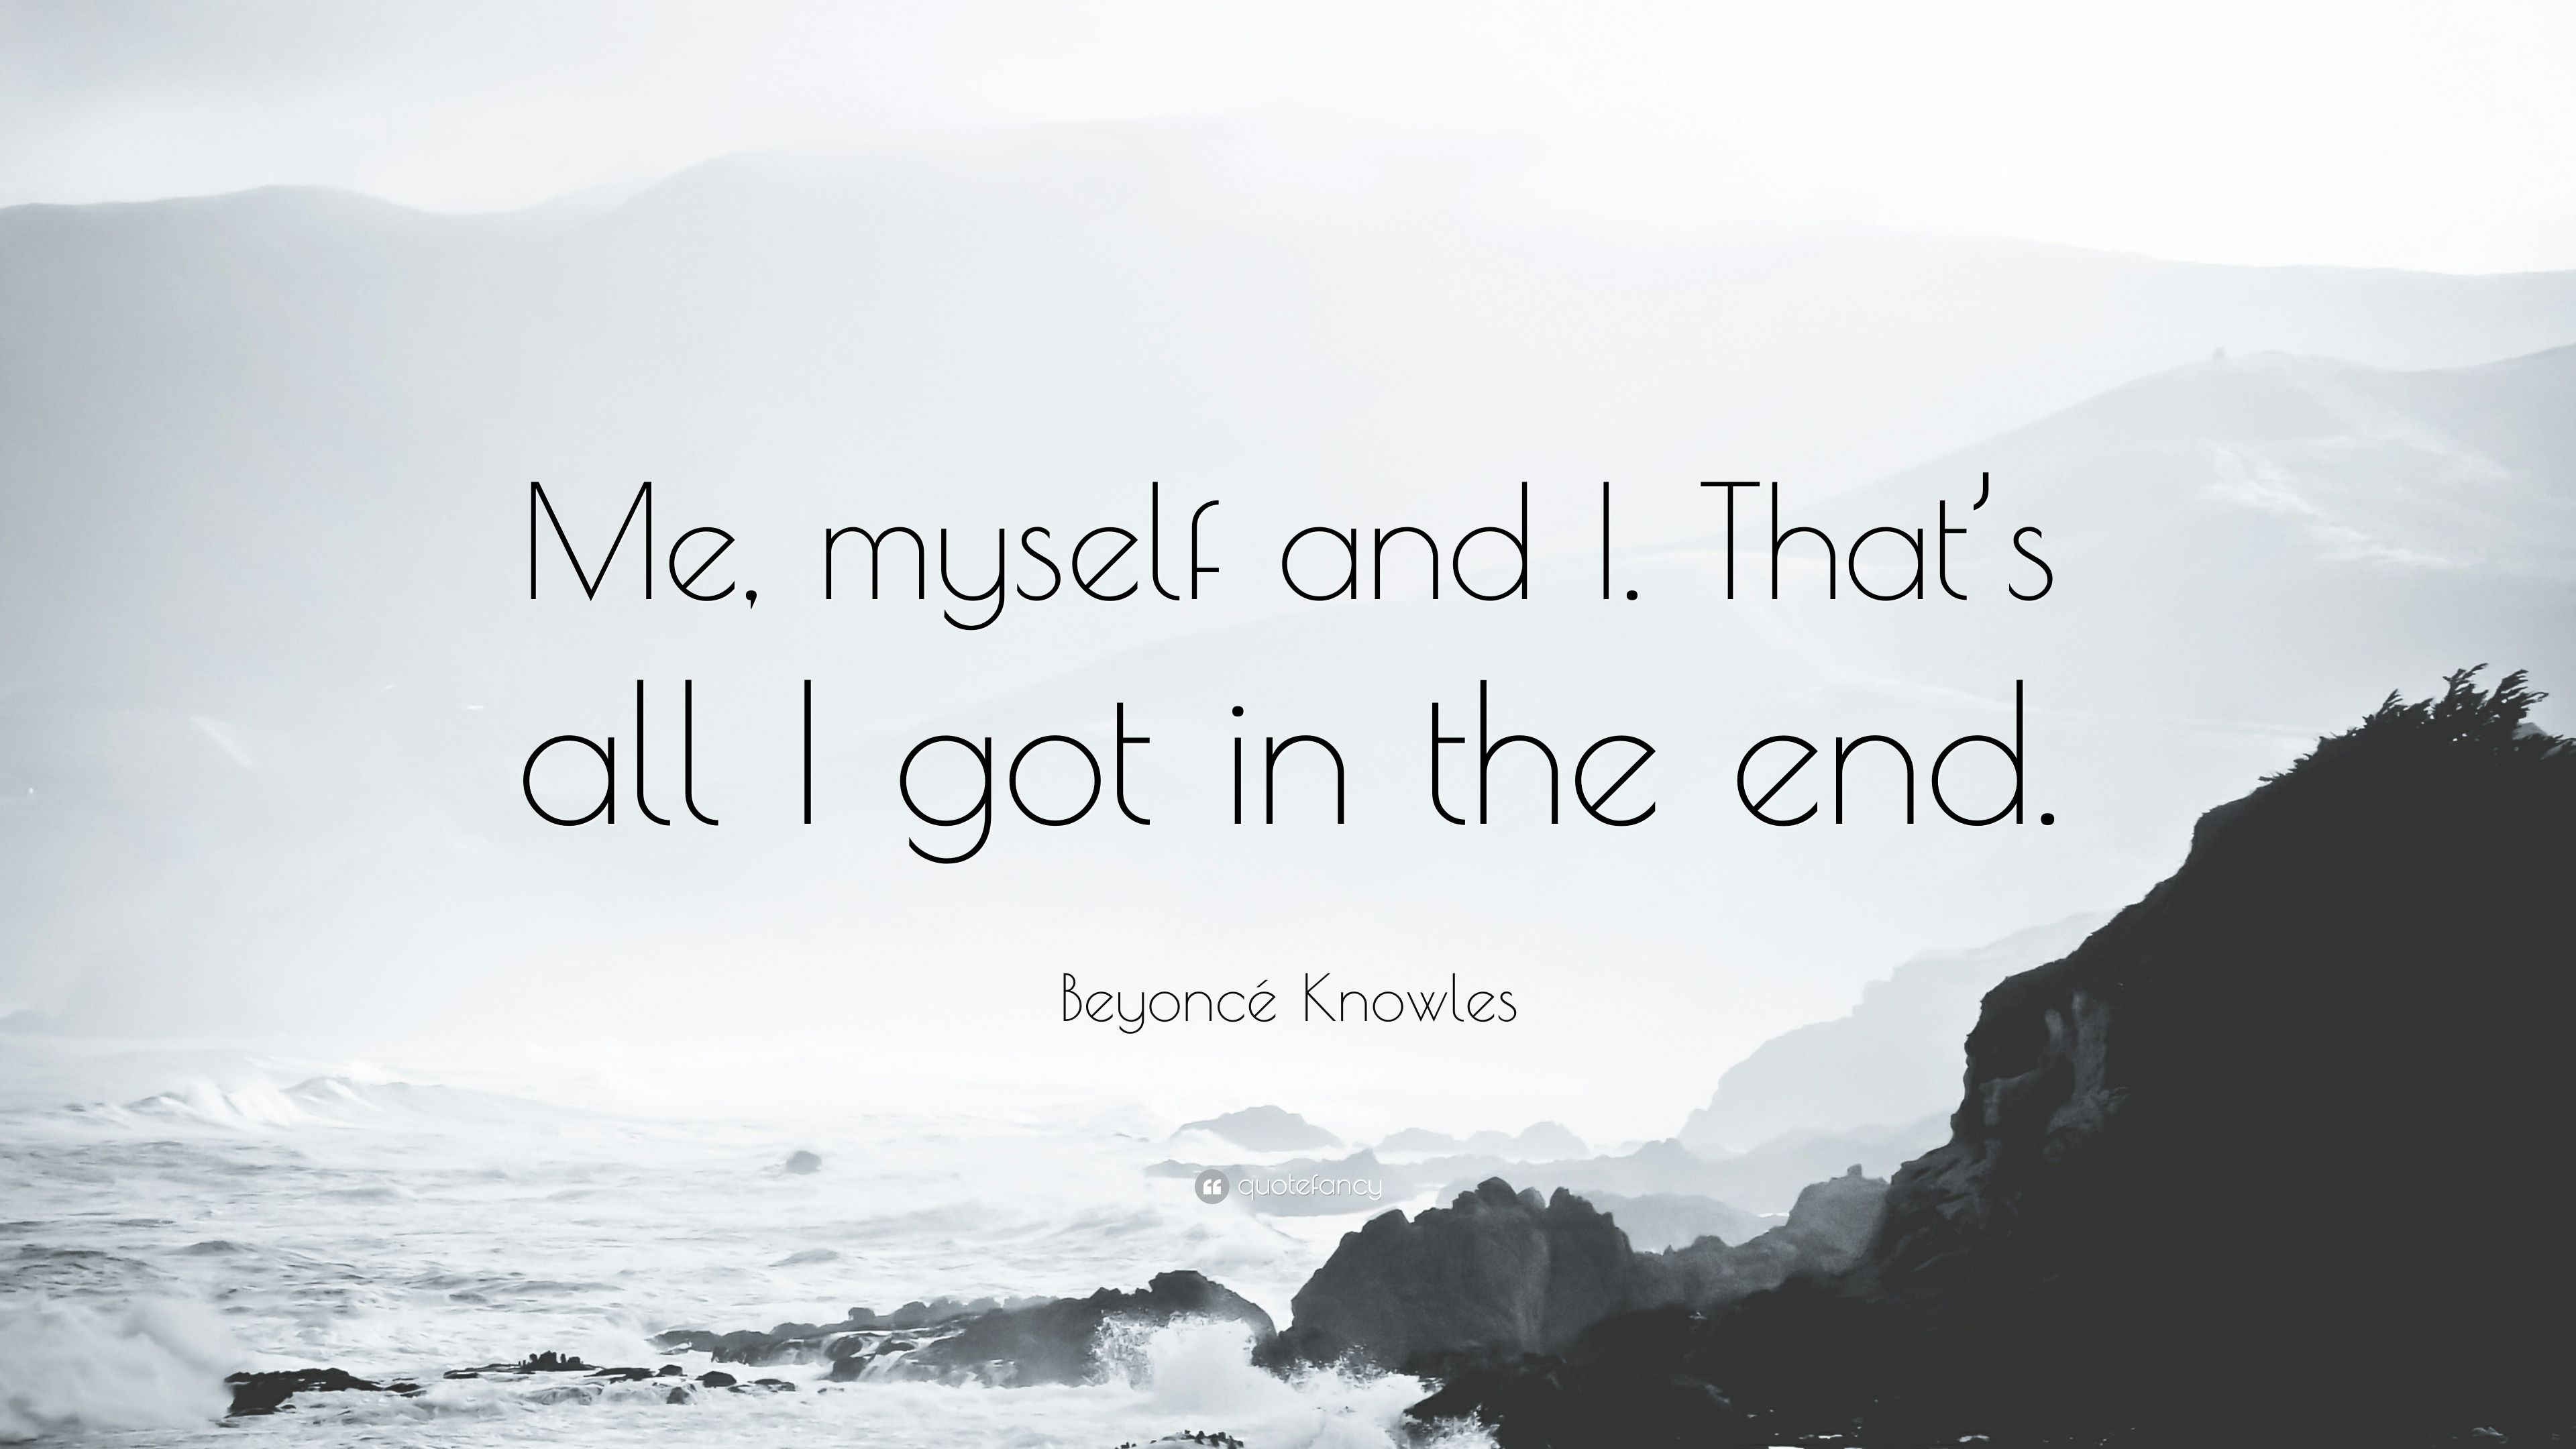 Beyoncé Knowles Quote: “Me, myself and I. That's all I got in the end.”